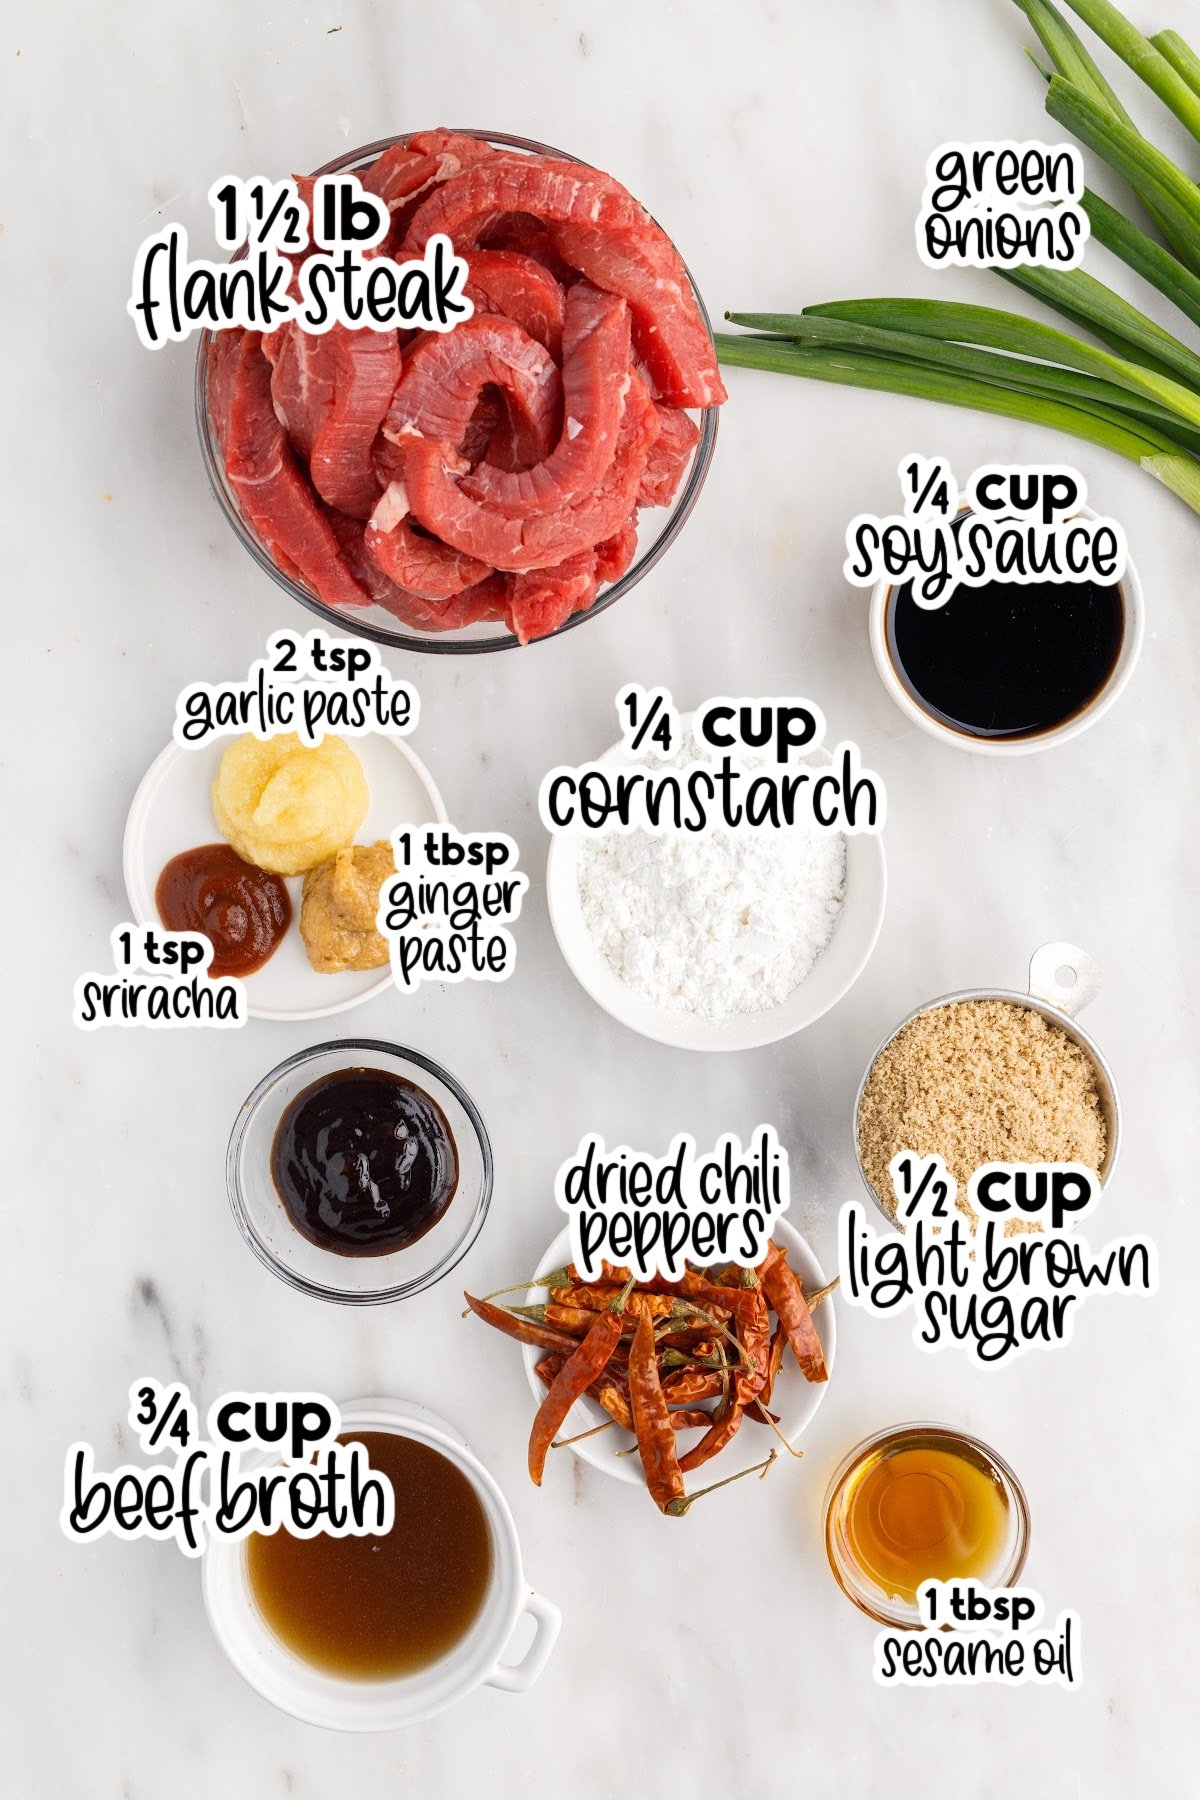 All ingredients layed out to make this dish in small bowls, with text overlays.